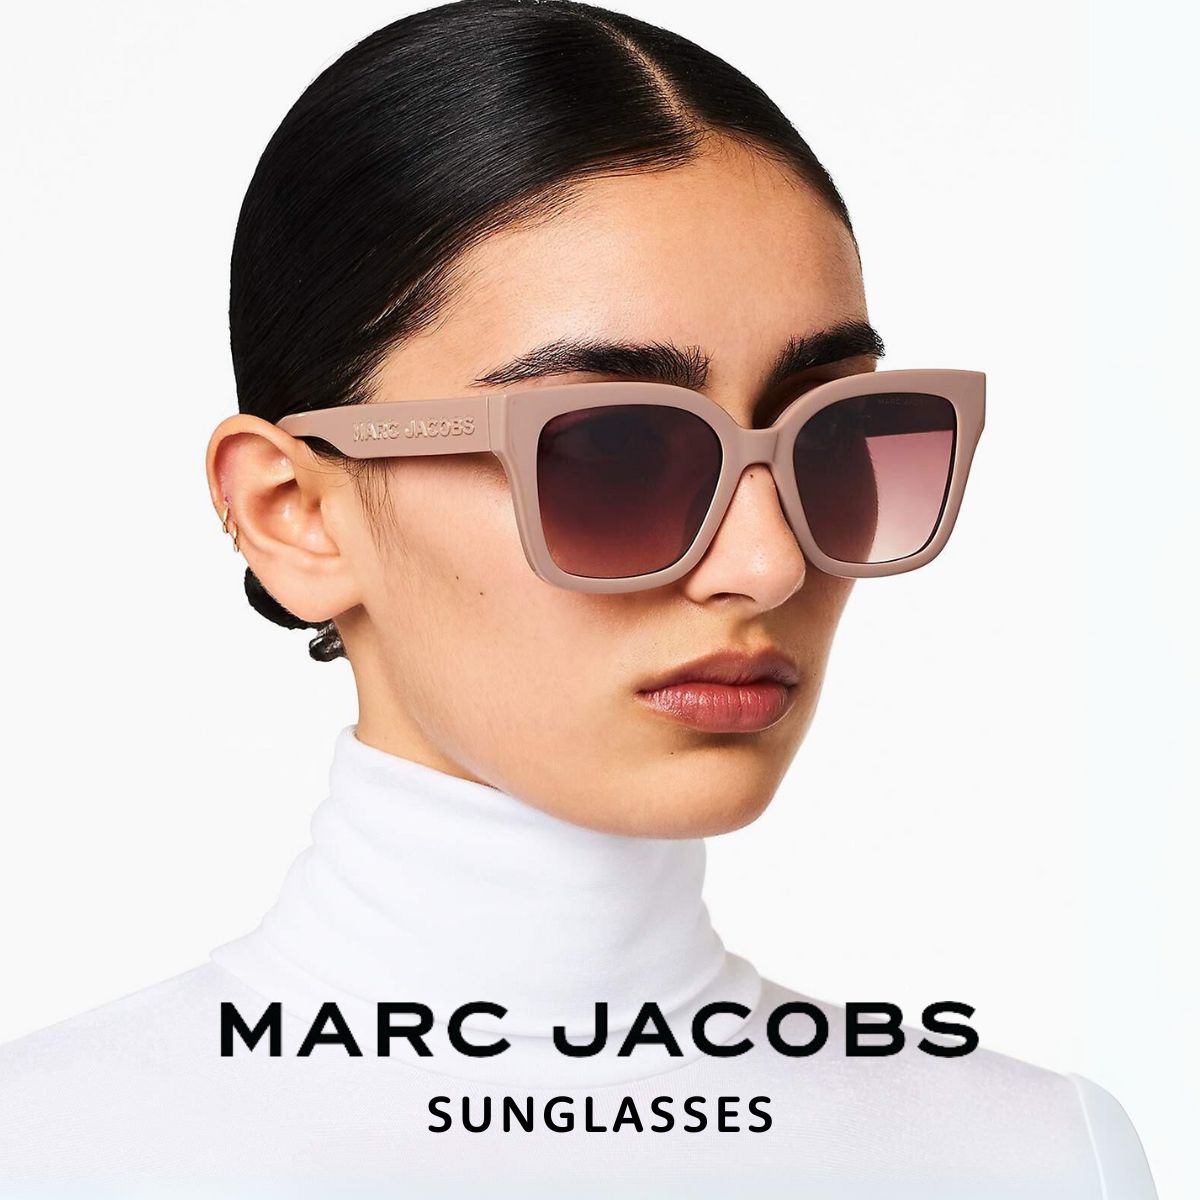 "Premium Marc Jacobs sunglasses available at Optorium Luxury in India. Enjoy hassle-free shopping with easy refunds and returns. Visit us now!"